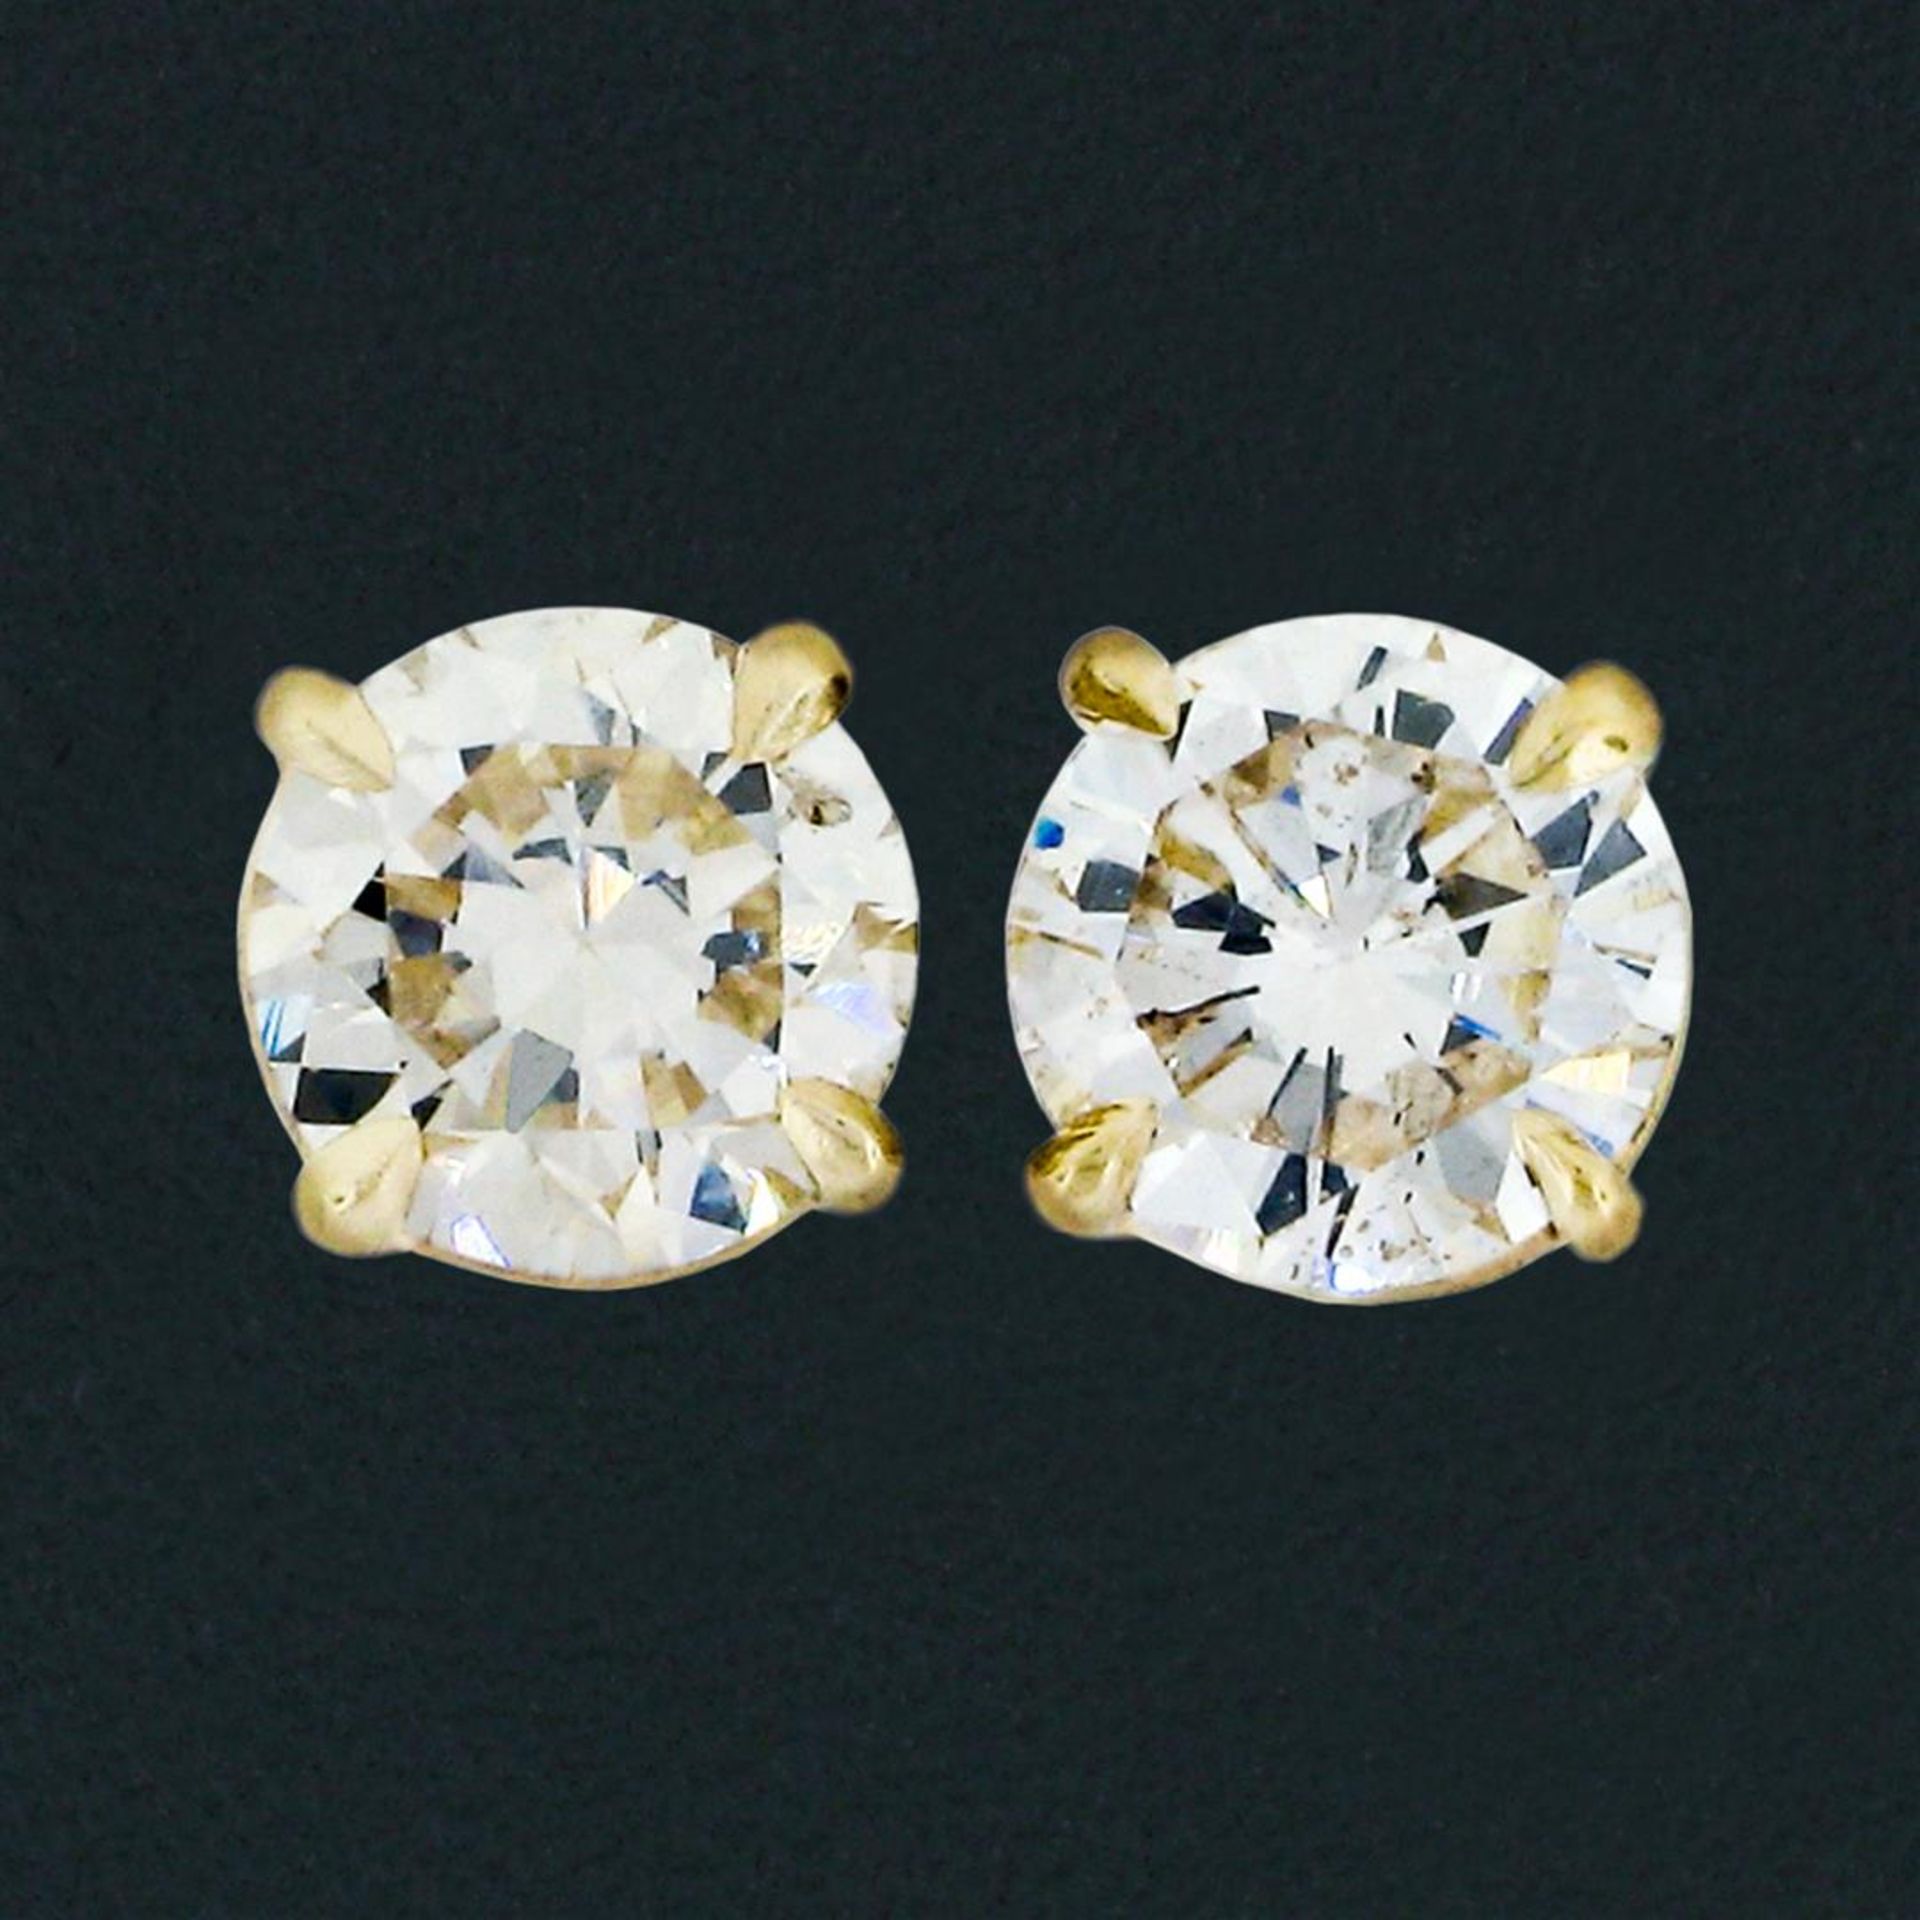 14k Yellow Gold 1.11ctw Round Brilliant Cut Diamond Claw Prong Stud Earrings